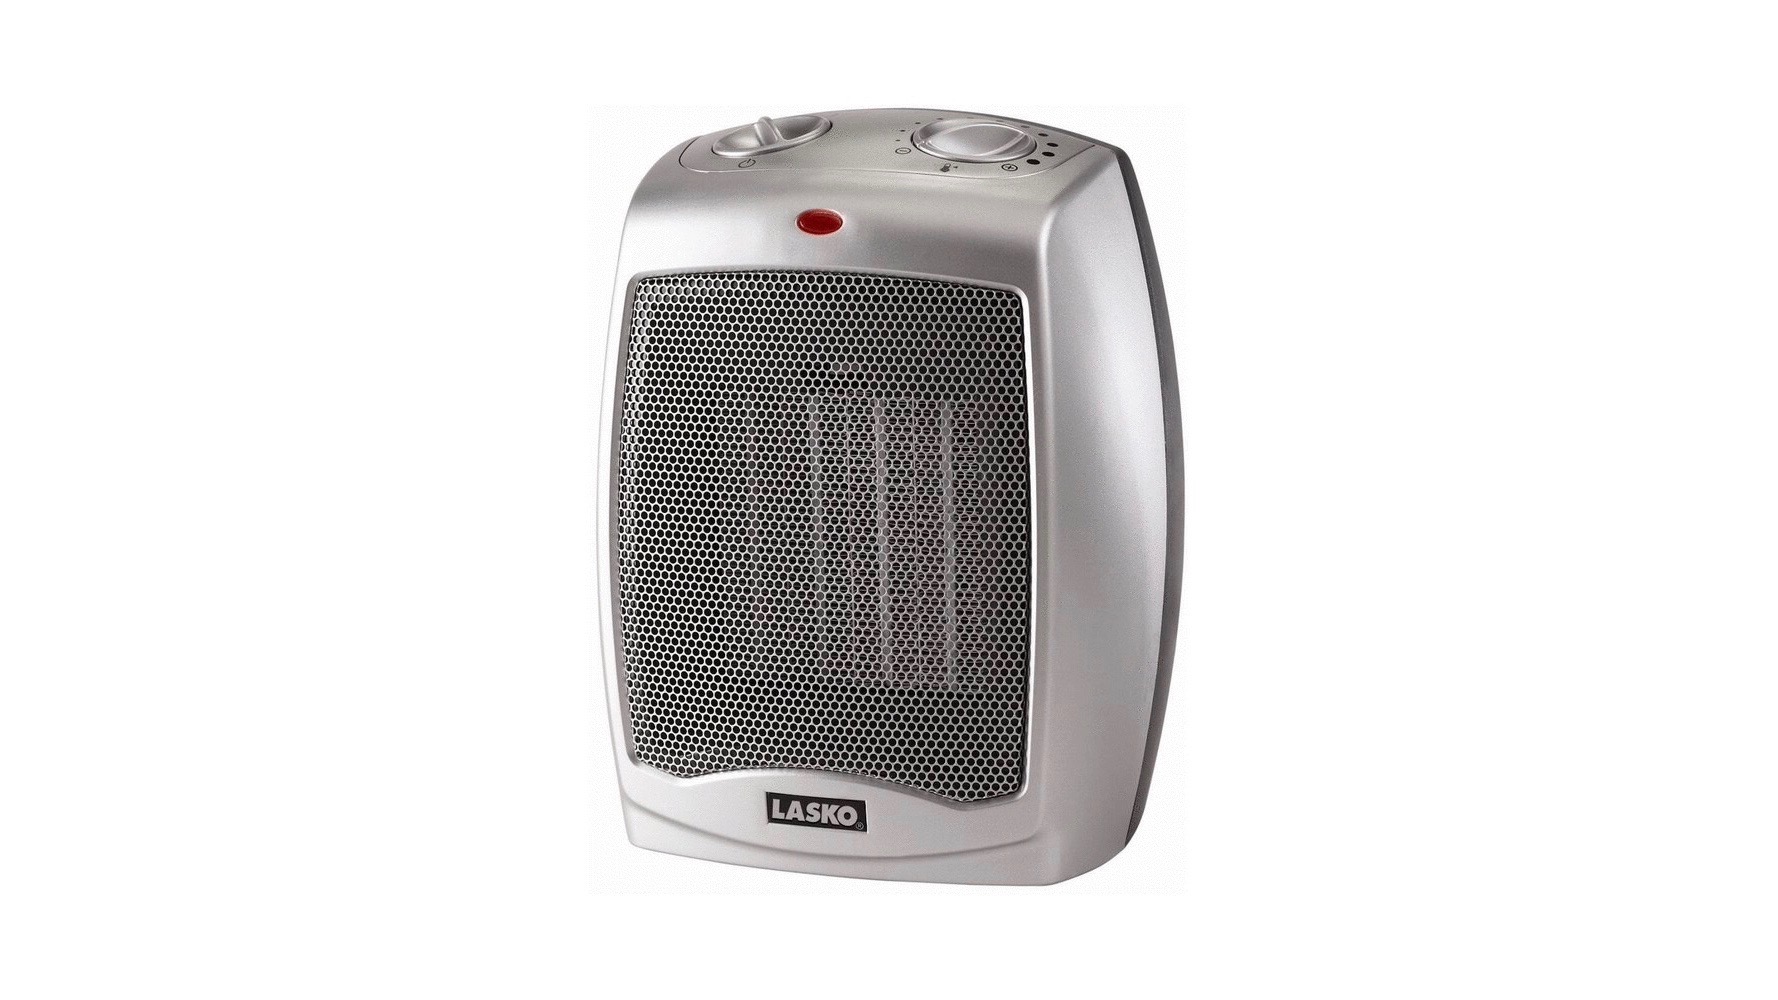 How To Clean A Space Heater?